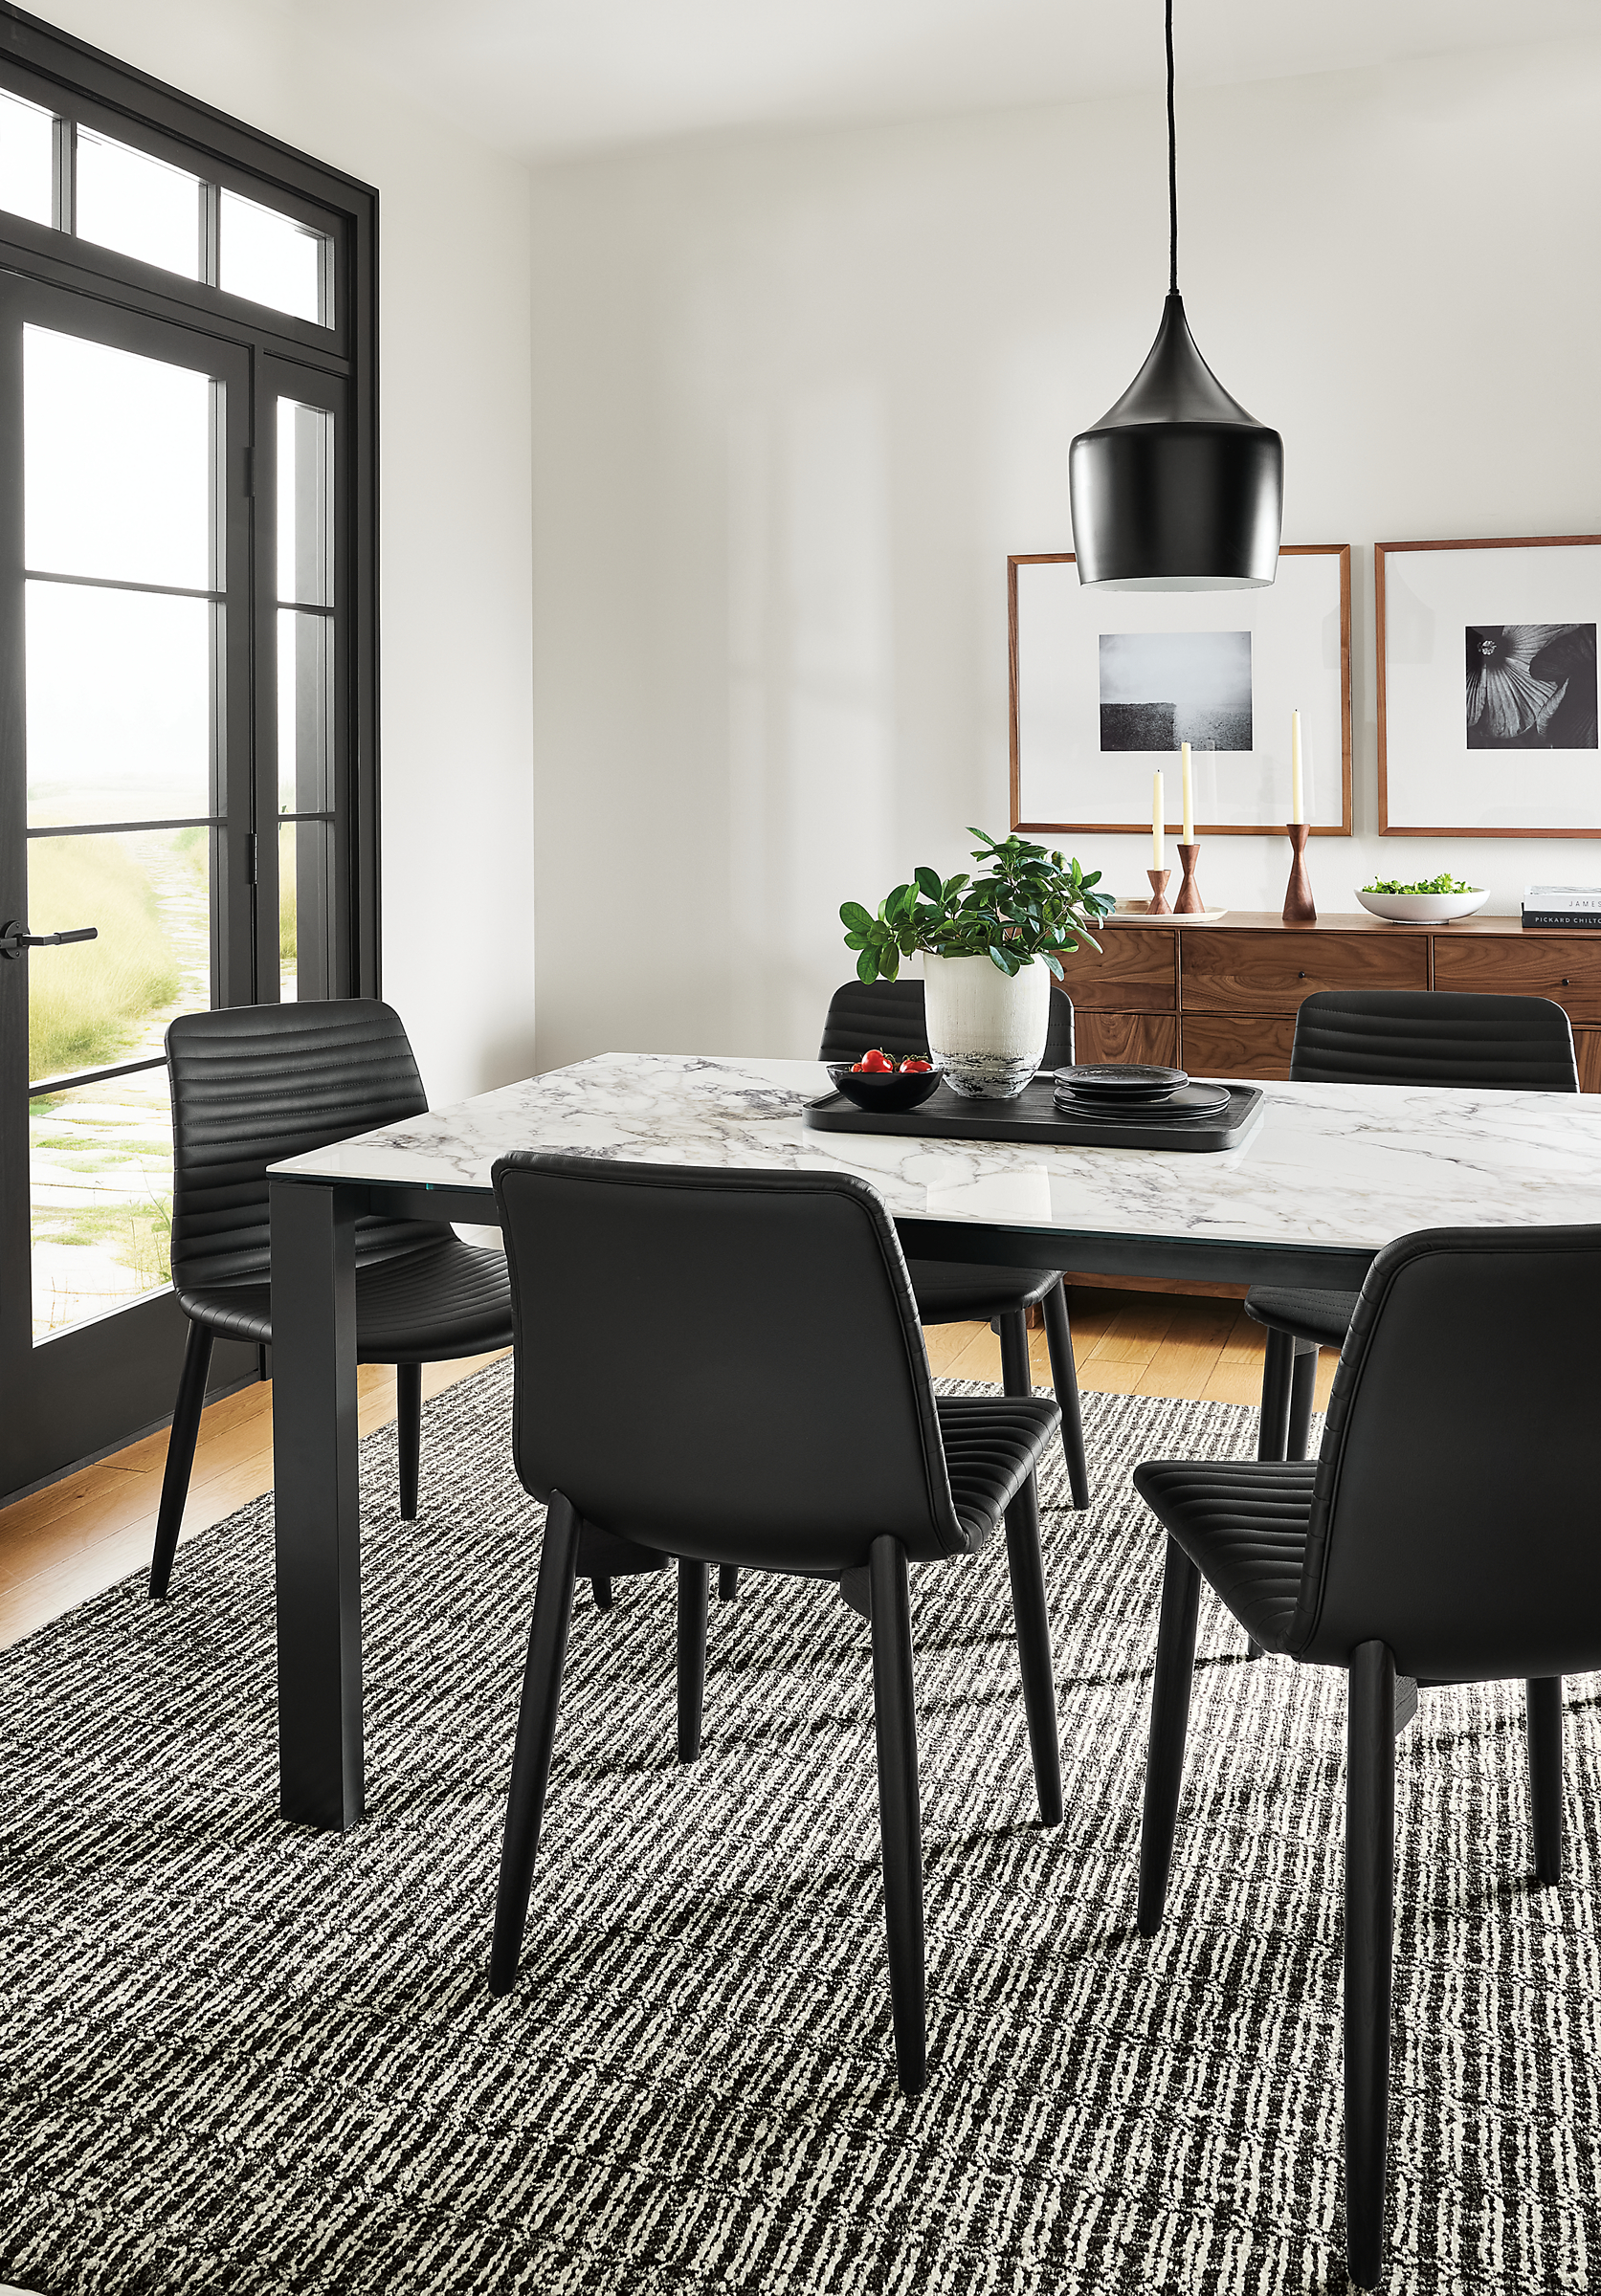 Dining room with Cato side chairs in Black Leather, Metric table with marbled bright white ceramic top and Nera rug in coal.